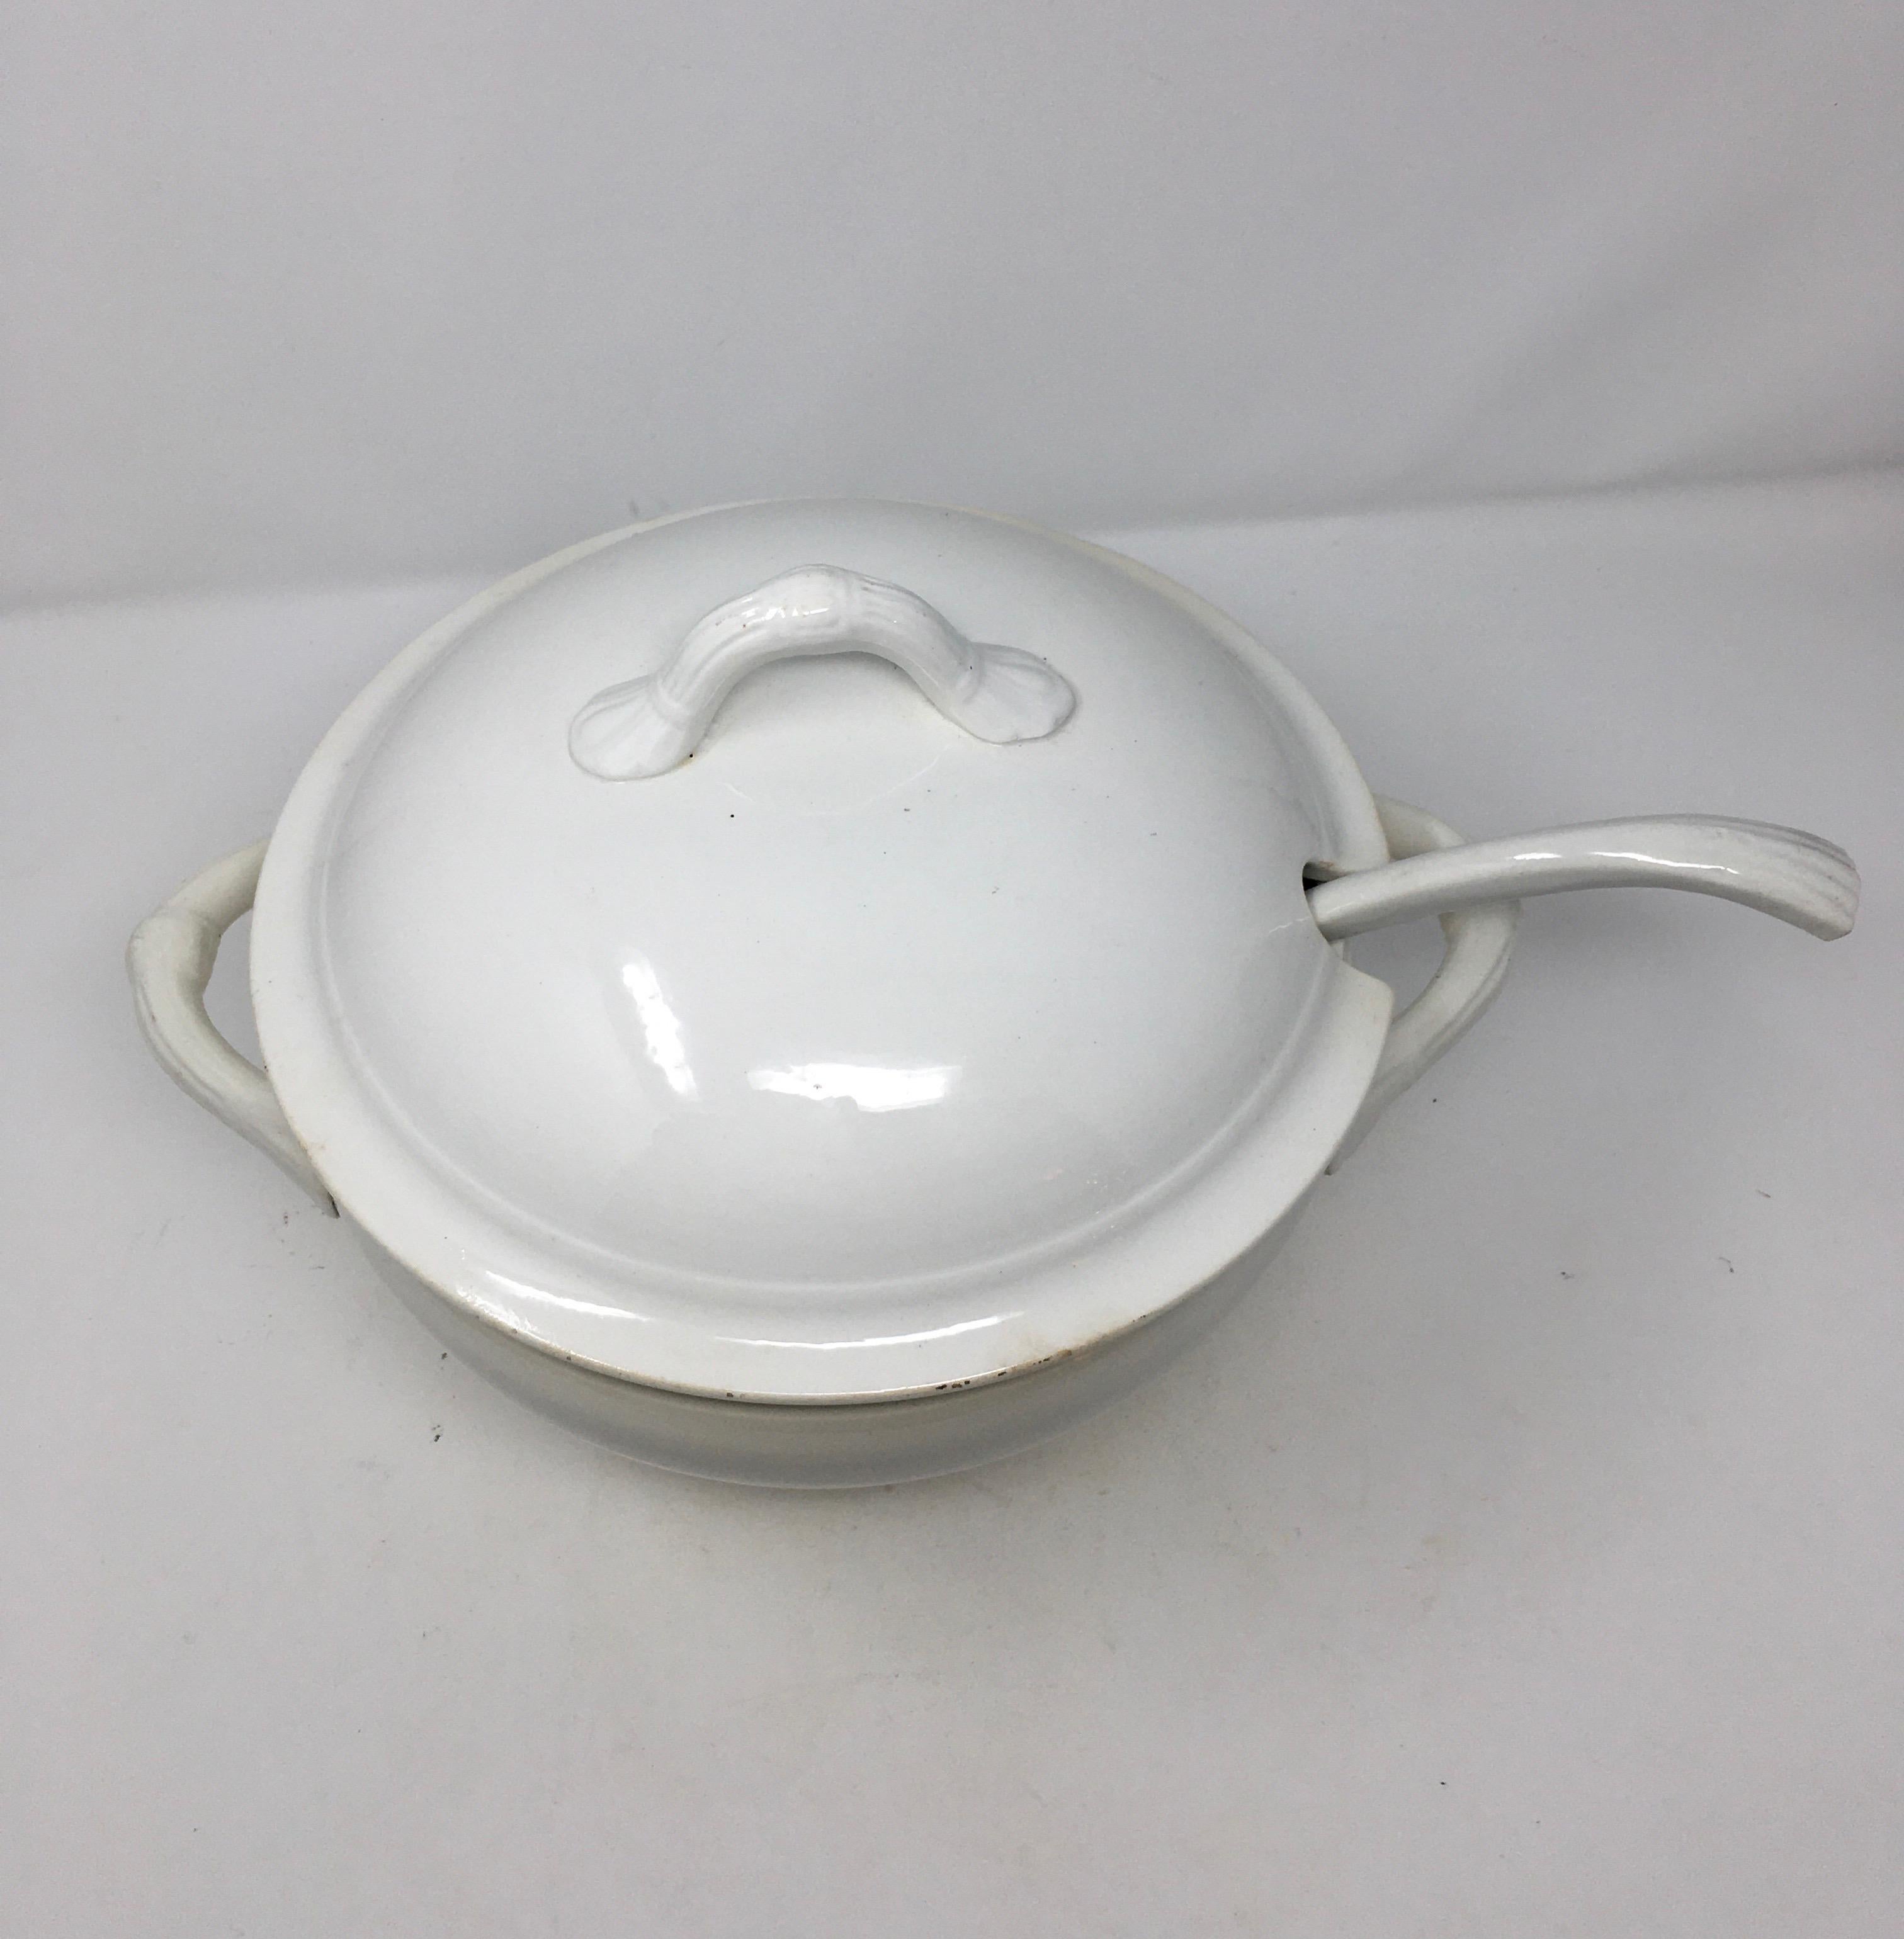 This is a Belgian ironstone tureen, with lid and ladle from the late 19th century. It is marked Manufacture Imperiale et Royale, Nimy, Fabrication Belge, Made in Belgium. The bowl was produced in the late 1800s-early 1900s in Belgium. This company